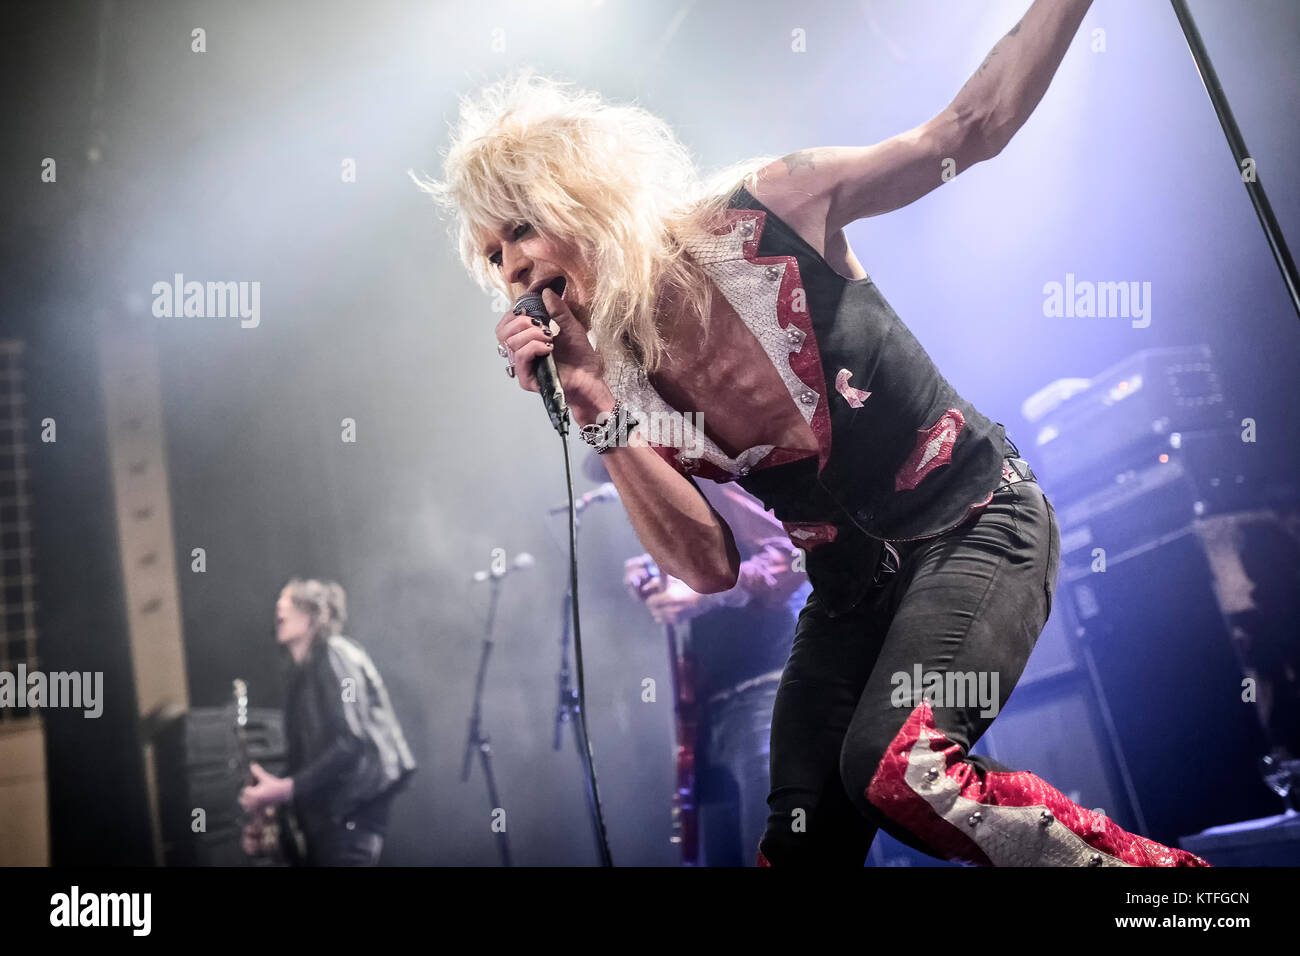 The Finnish rock musician and glam rock singer Michael Monroe performs live at Gjerdrum Kulturhus. Michael Monroe was known as the vocalist of the bands Hanoi Rocks, Demolition 23 and Jerusalem Slim. Norway, 22/10 2016. Stock Photo